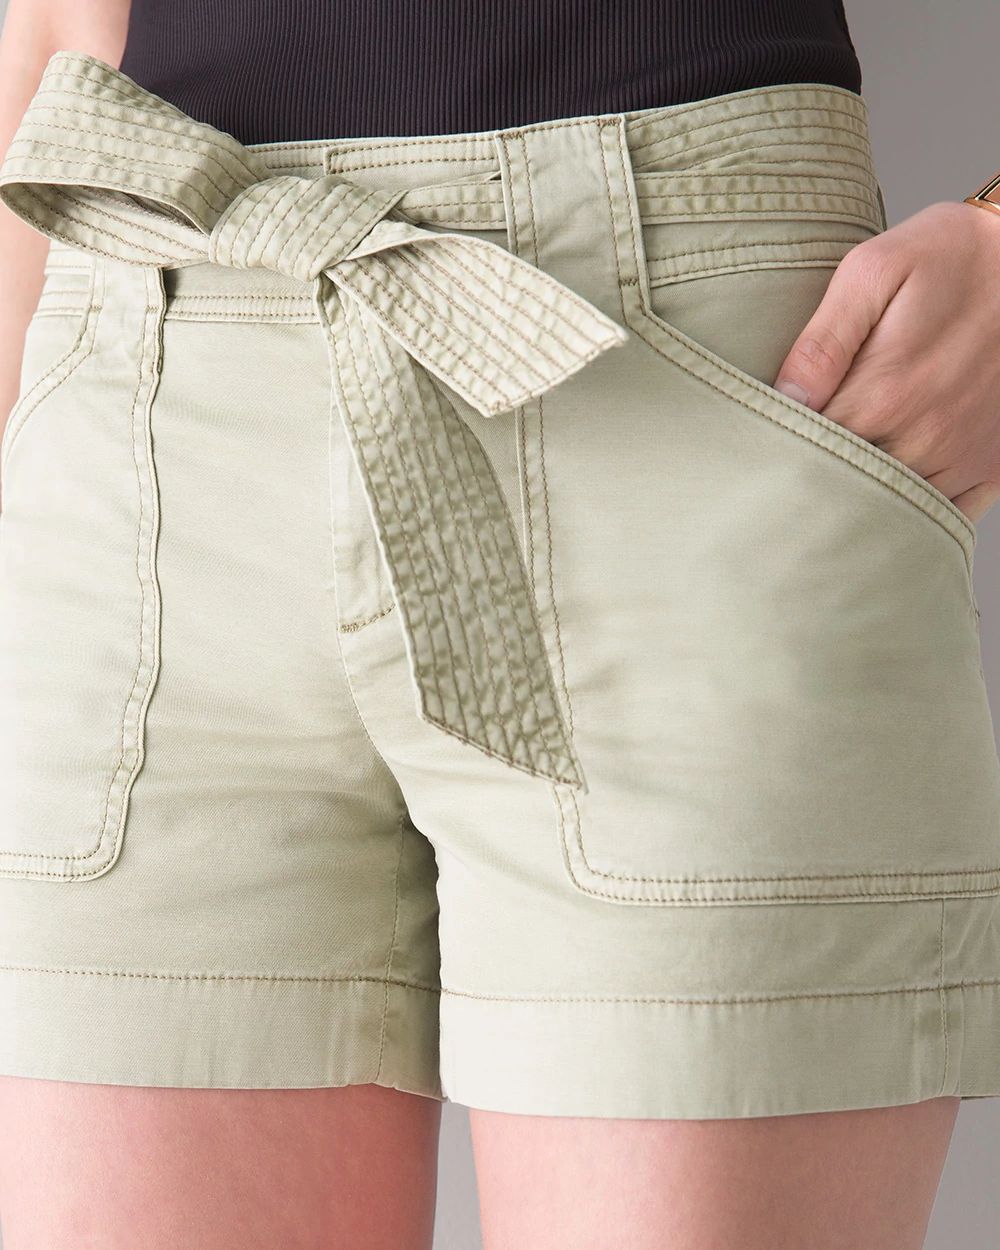 High-Rise Belted Pret Utility 5-Inch Shorts click to view larger image.